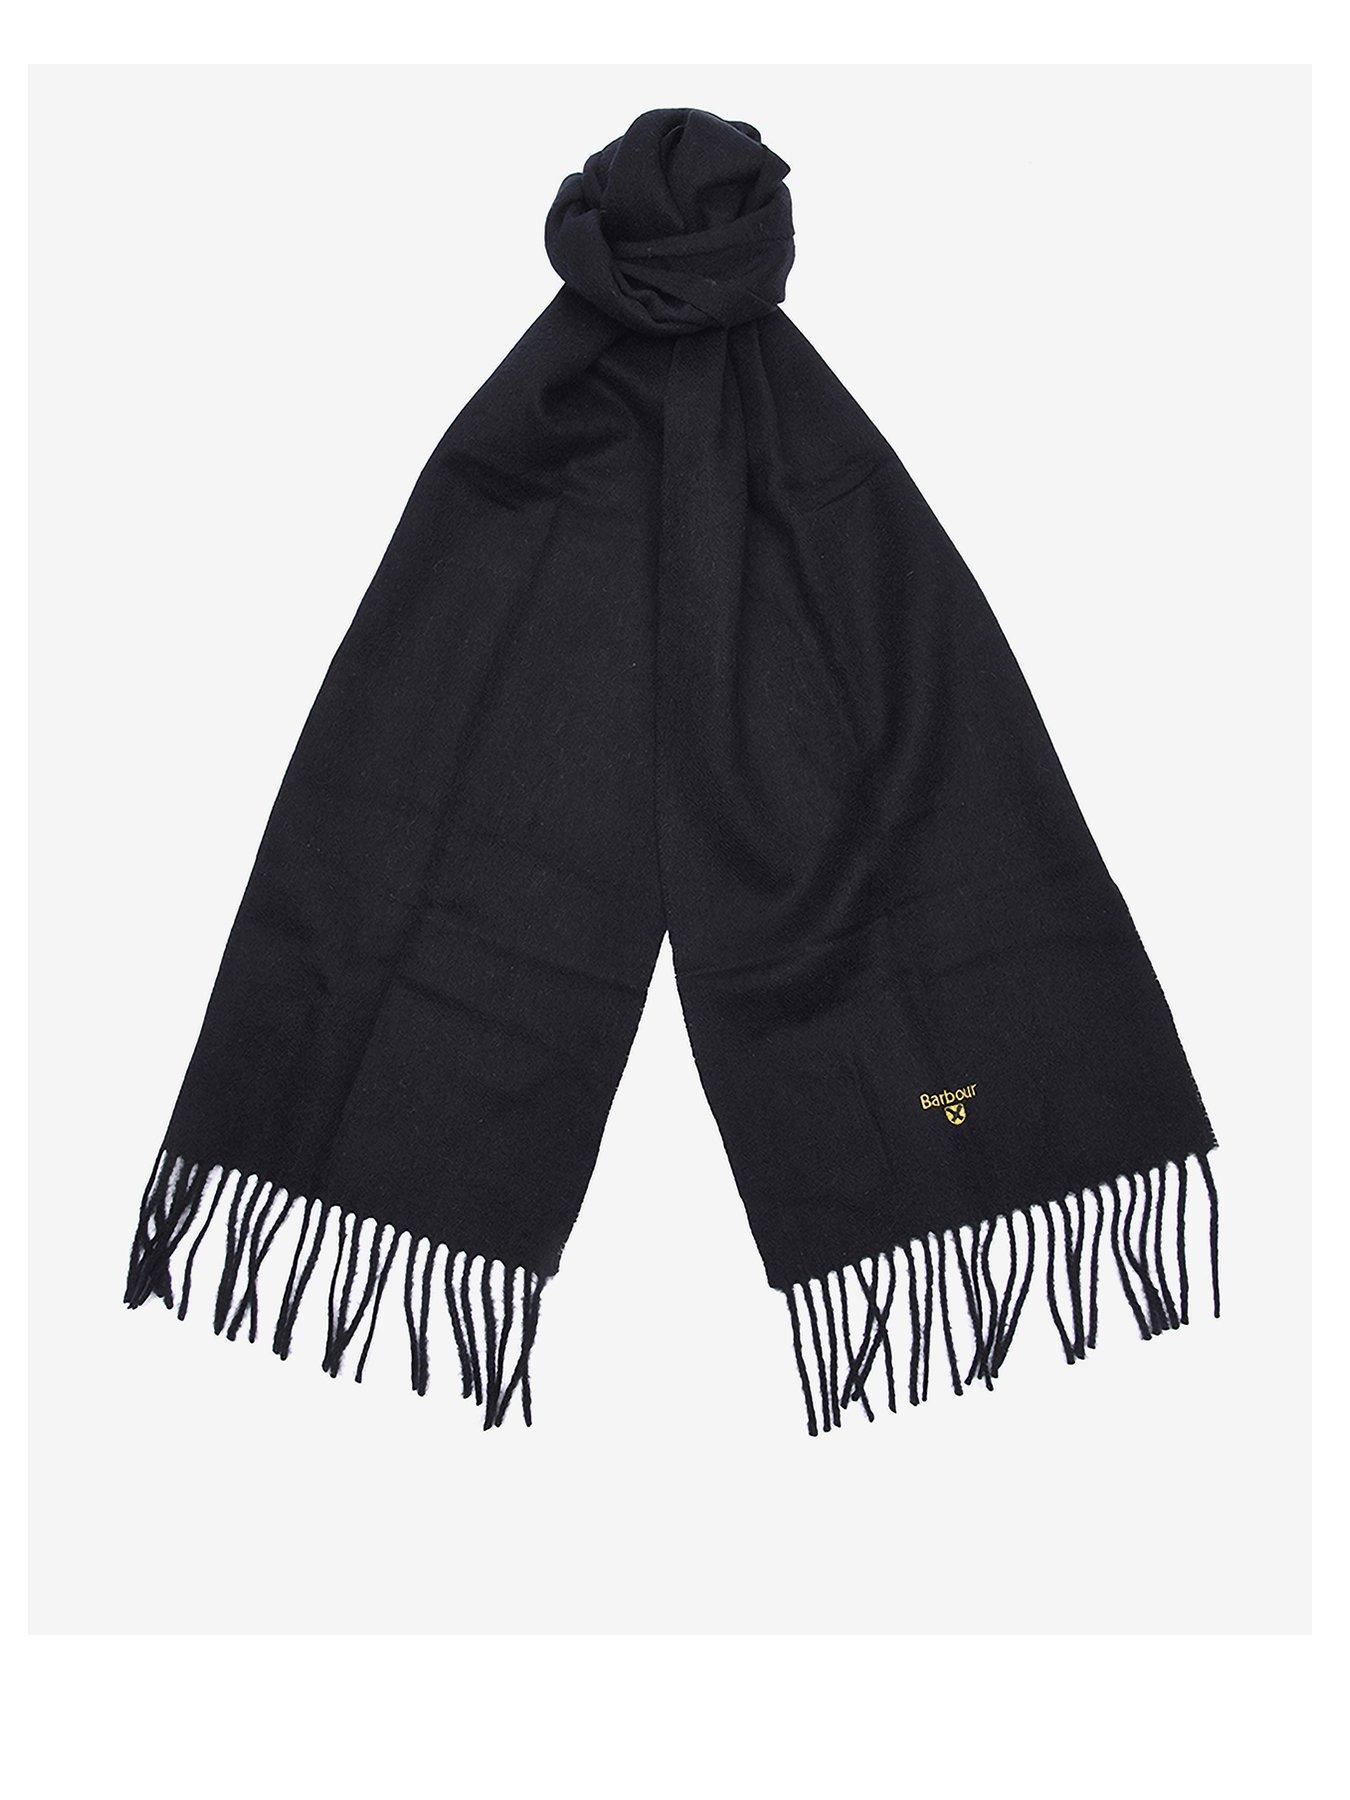 Barbour Plain Lambswool Scarf - Black | very.co.uk